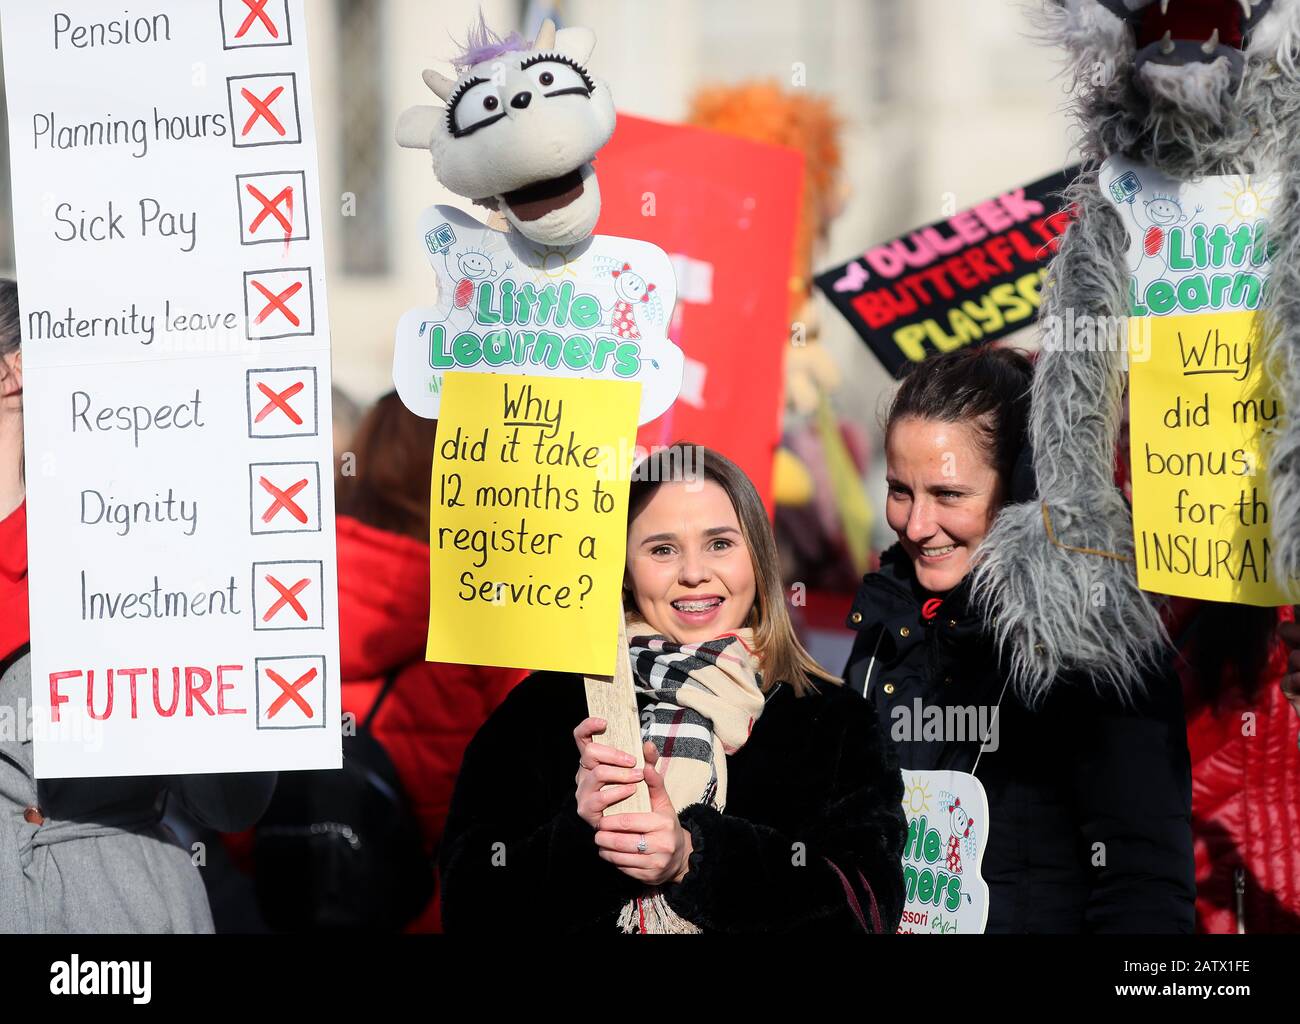 Teachers from Little Learners in Dublin attend a demonstration as childcare workers take part in a protest in Dublin's city centre over low wages and to highlight the childcare crisis. Stock Photo